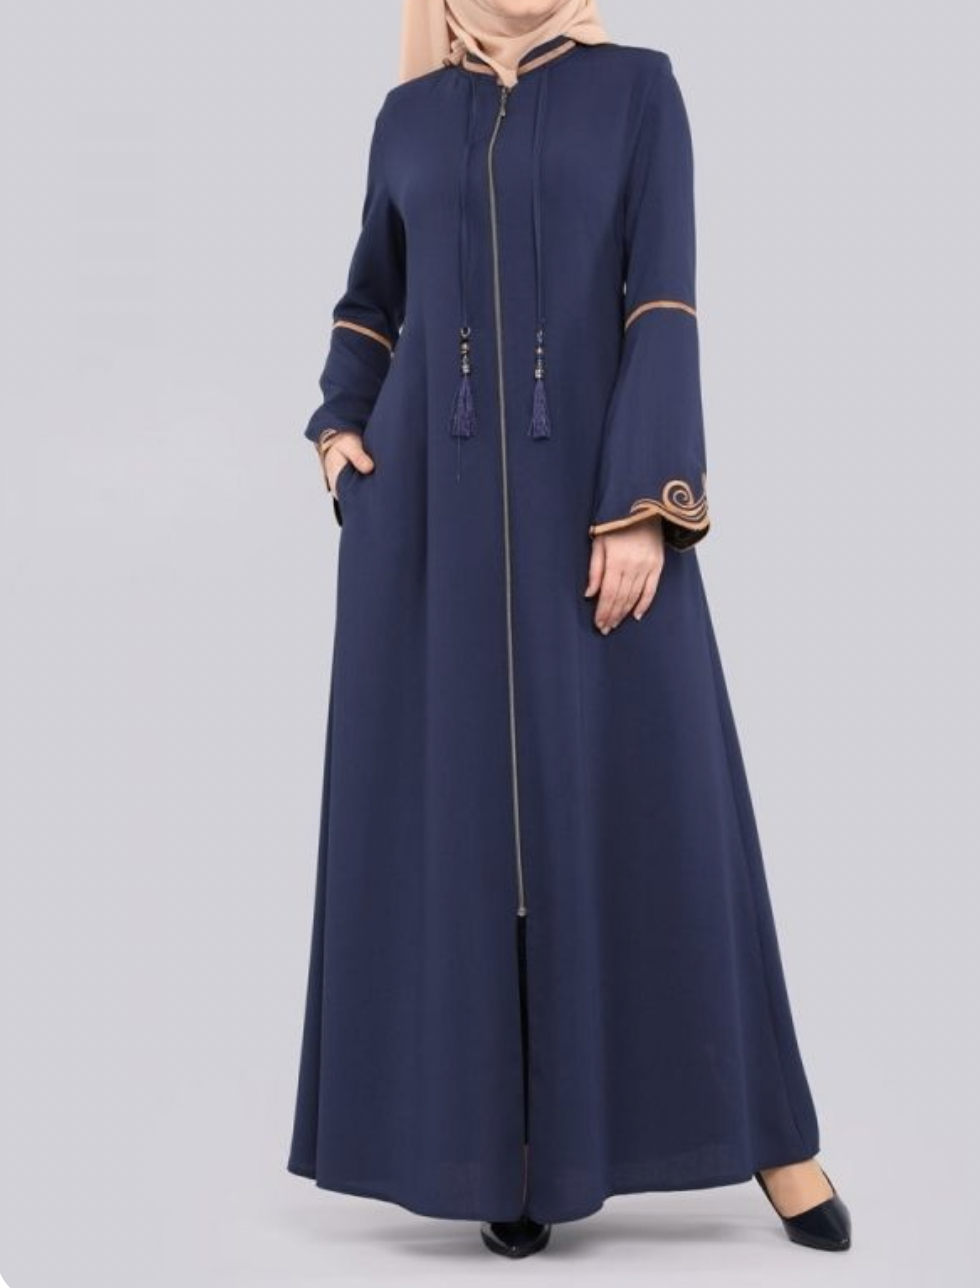 Abaya for women: how to choose the ...